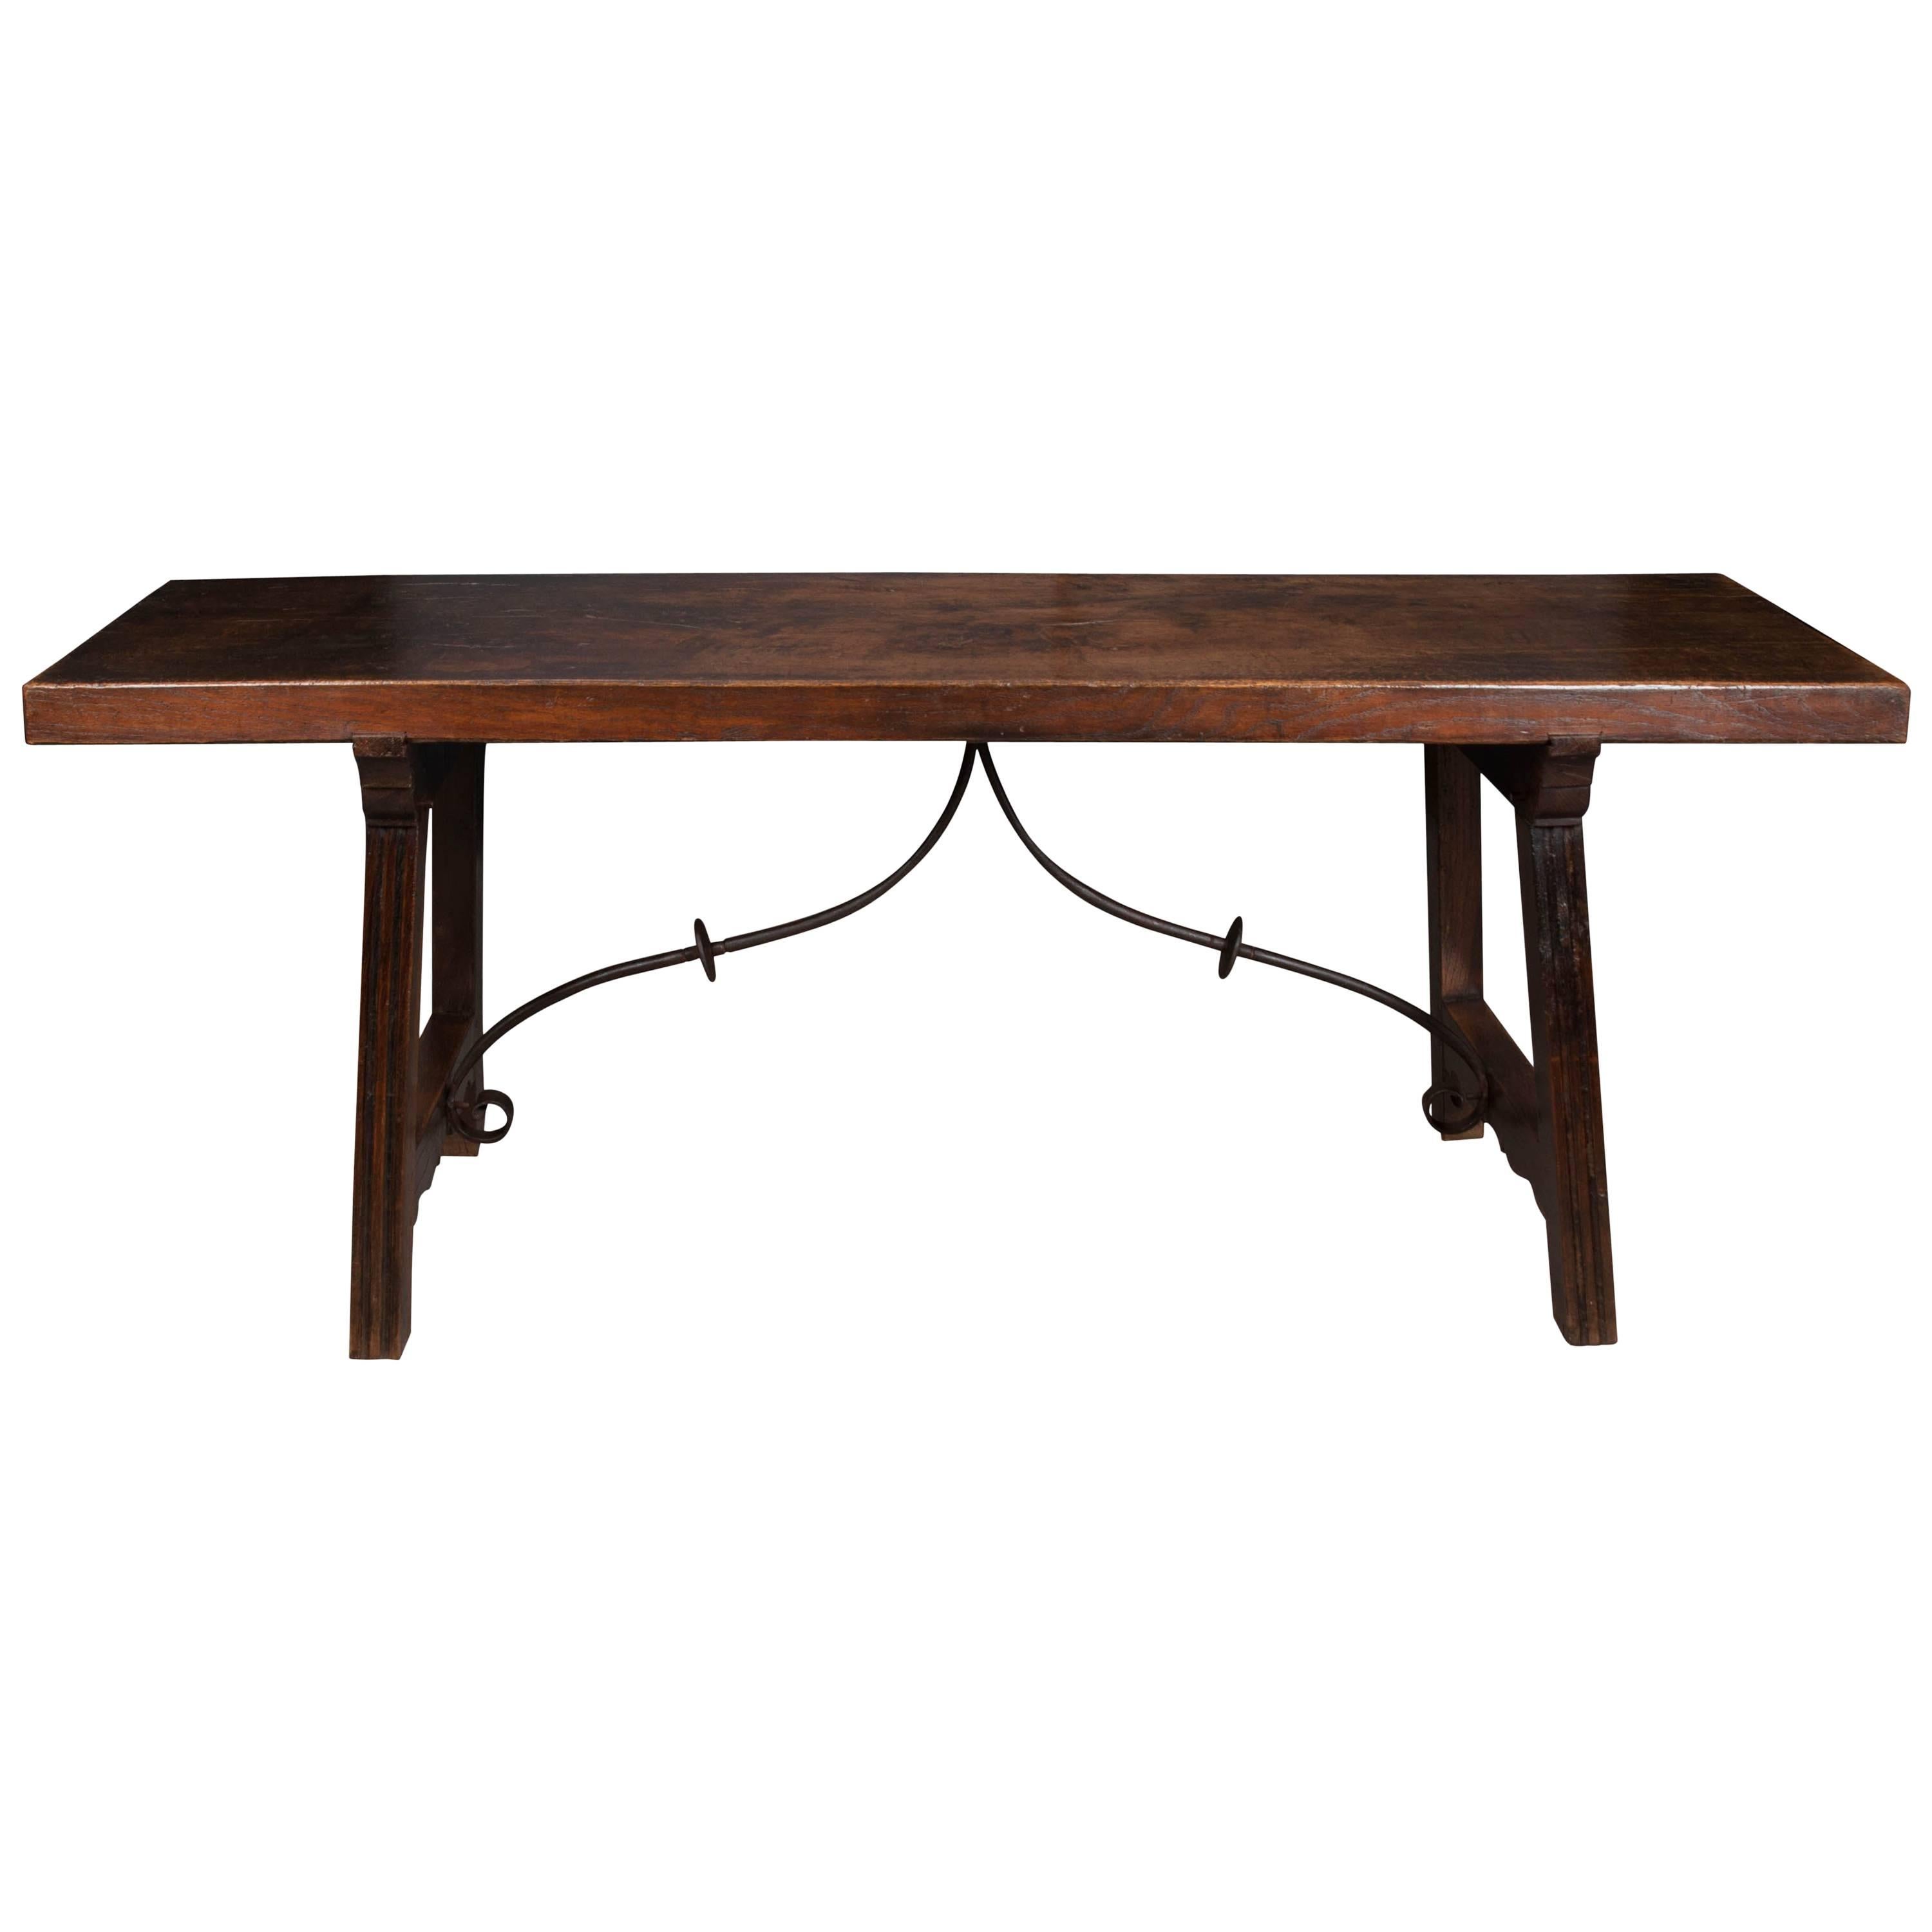 Spanish Late 18th Century Single Board Refectory Table